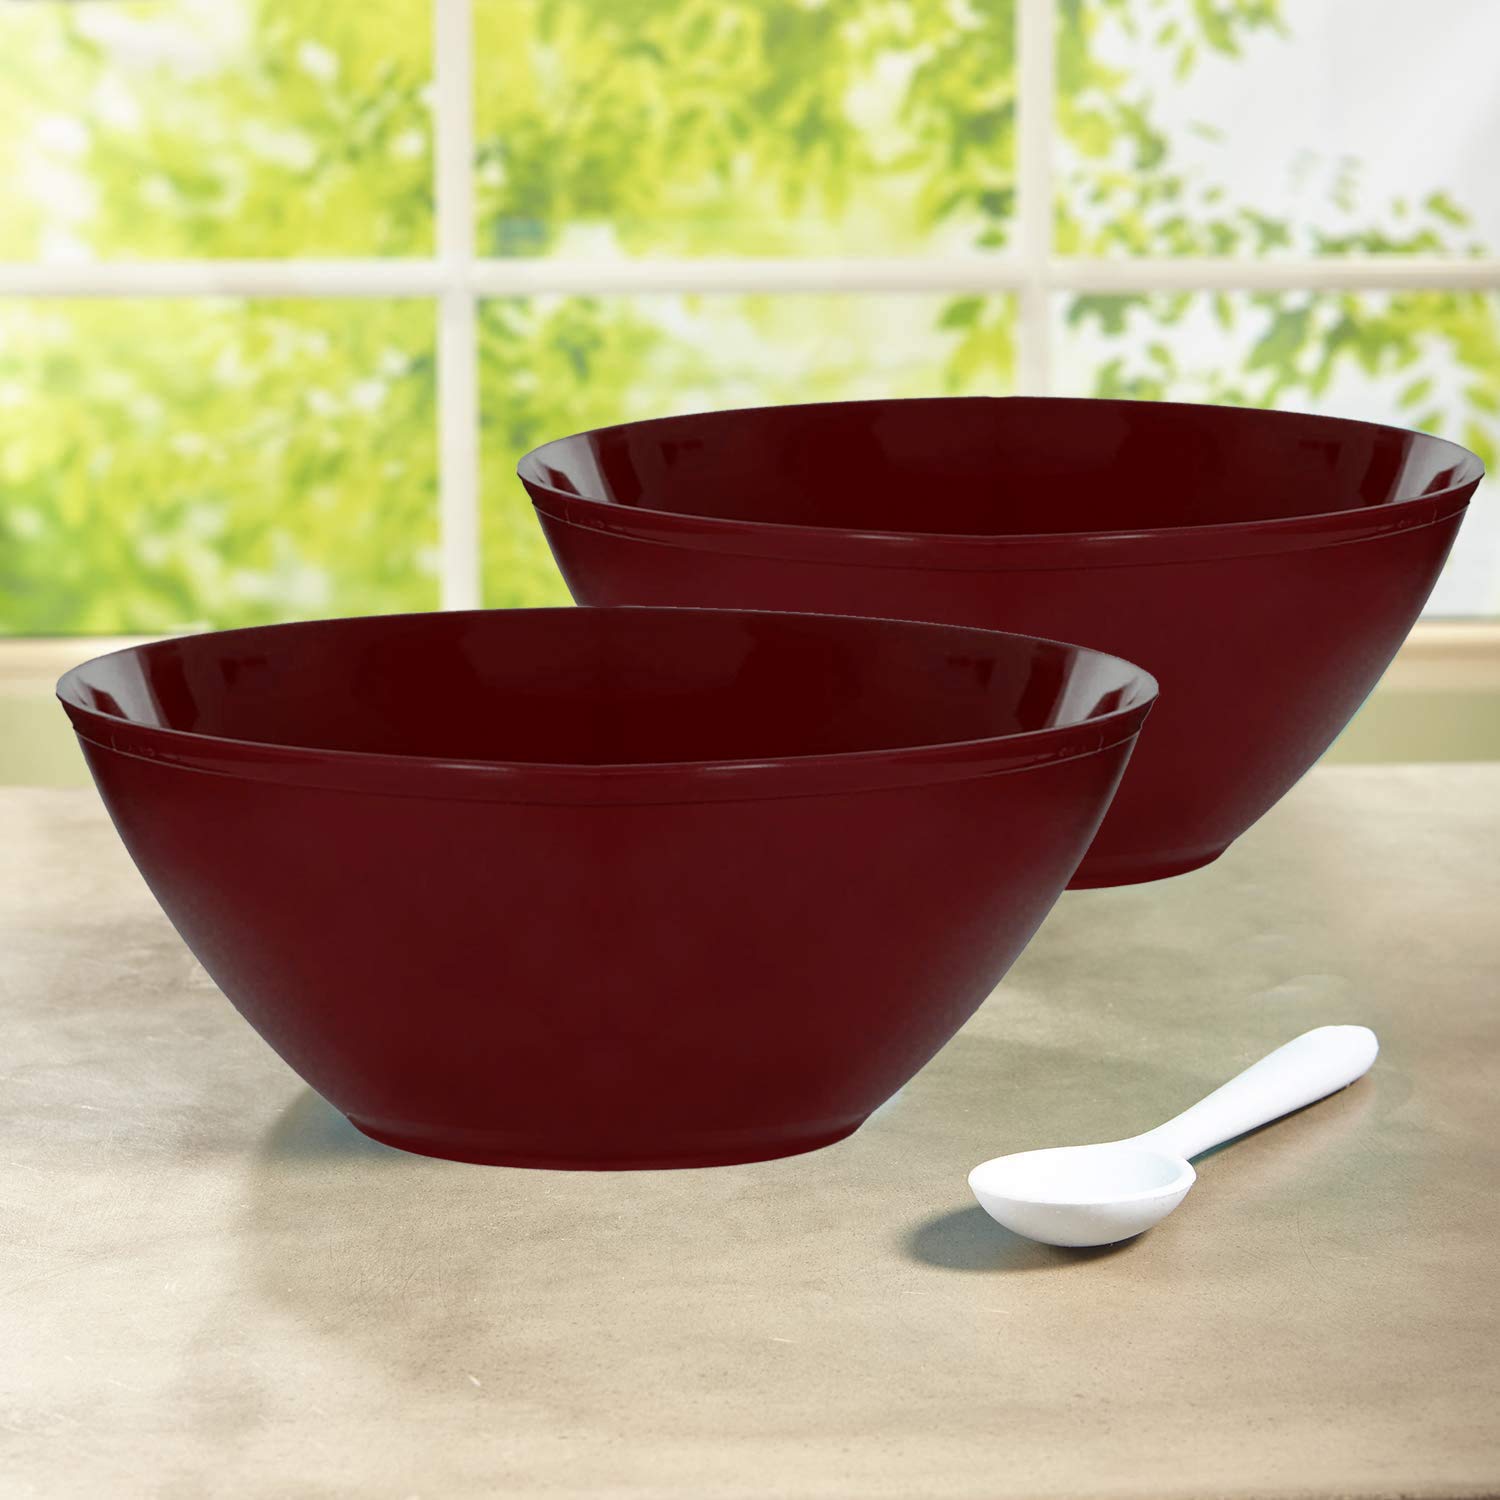 Kuber Industries Plastic Microwave Safe Unbreakable Mixing Bowl/Salad/Dining Table/Kitchen Plastic Bowl Set, 500 Ml (Set of 6) Brown-KUBMART15647